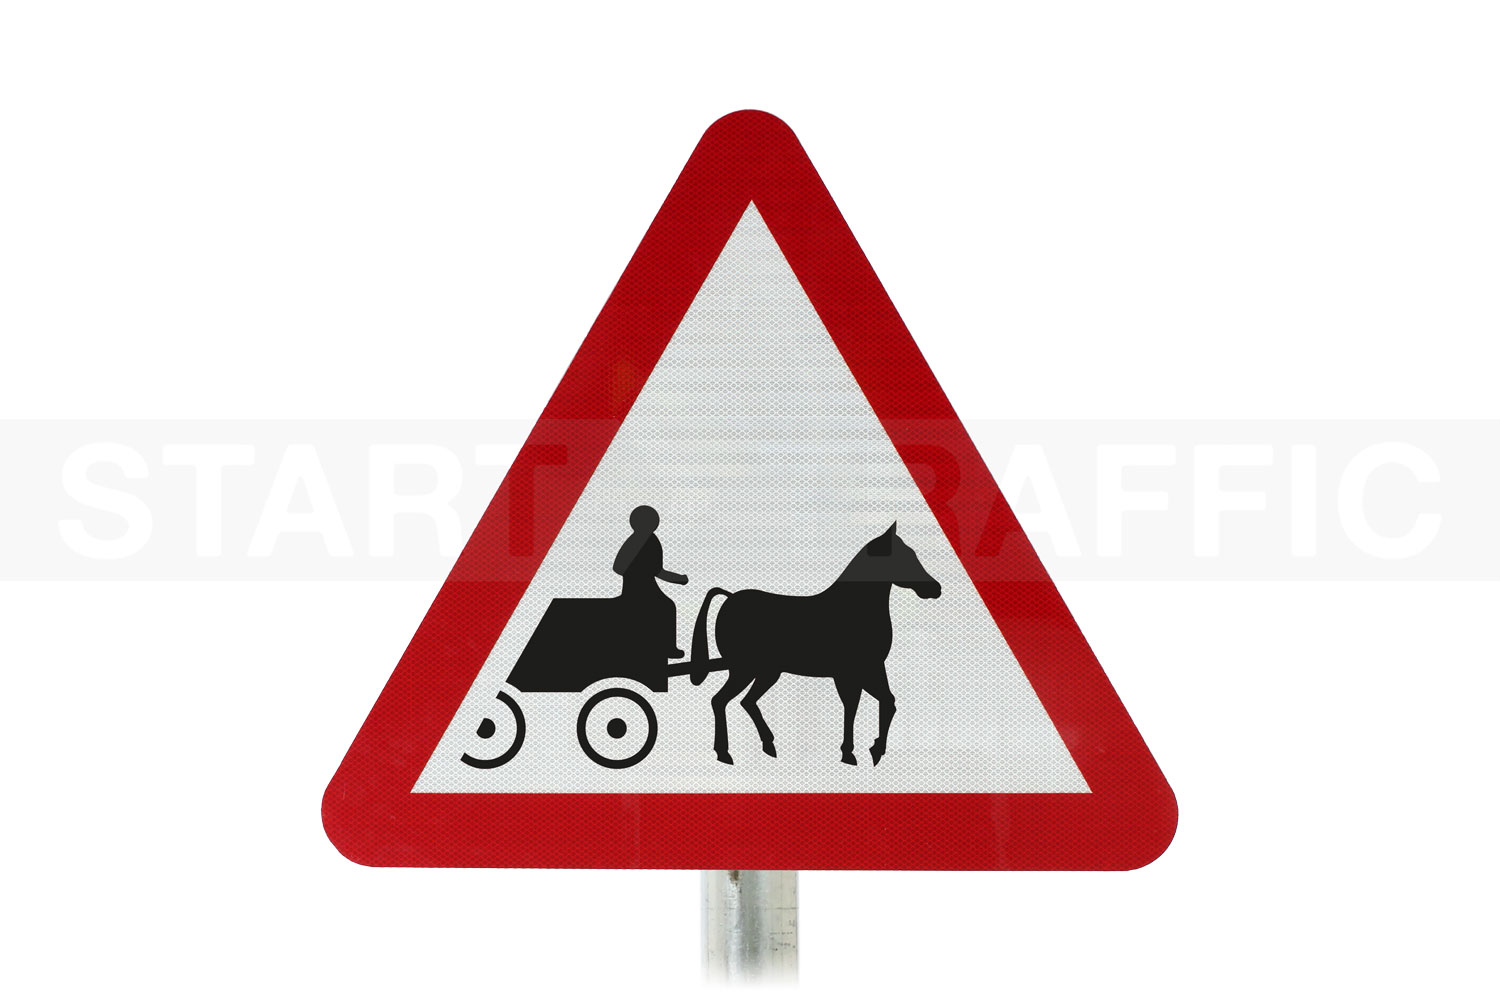 Horse drawn vehicles likely in road Post Mount sign